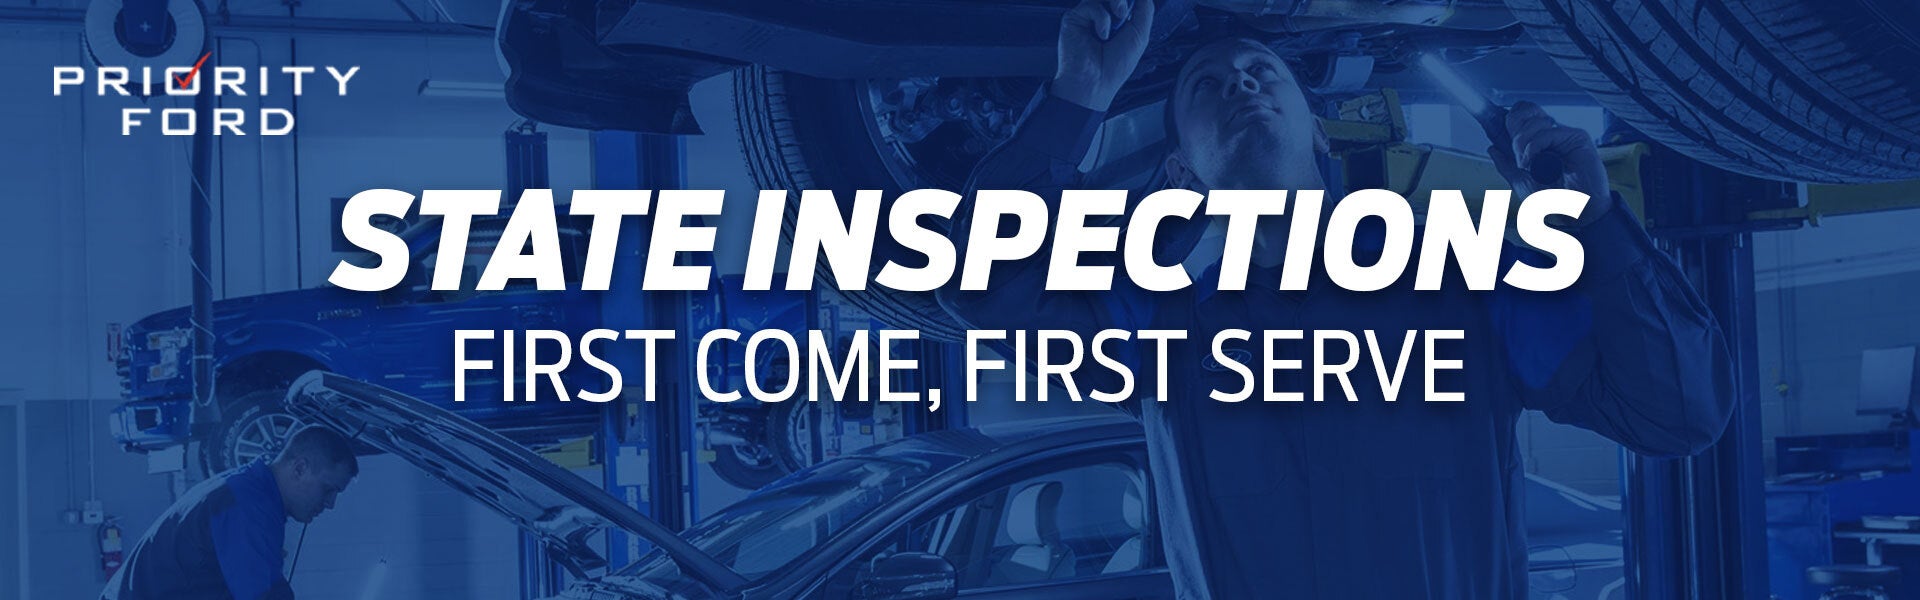 State Inspections Reminder